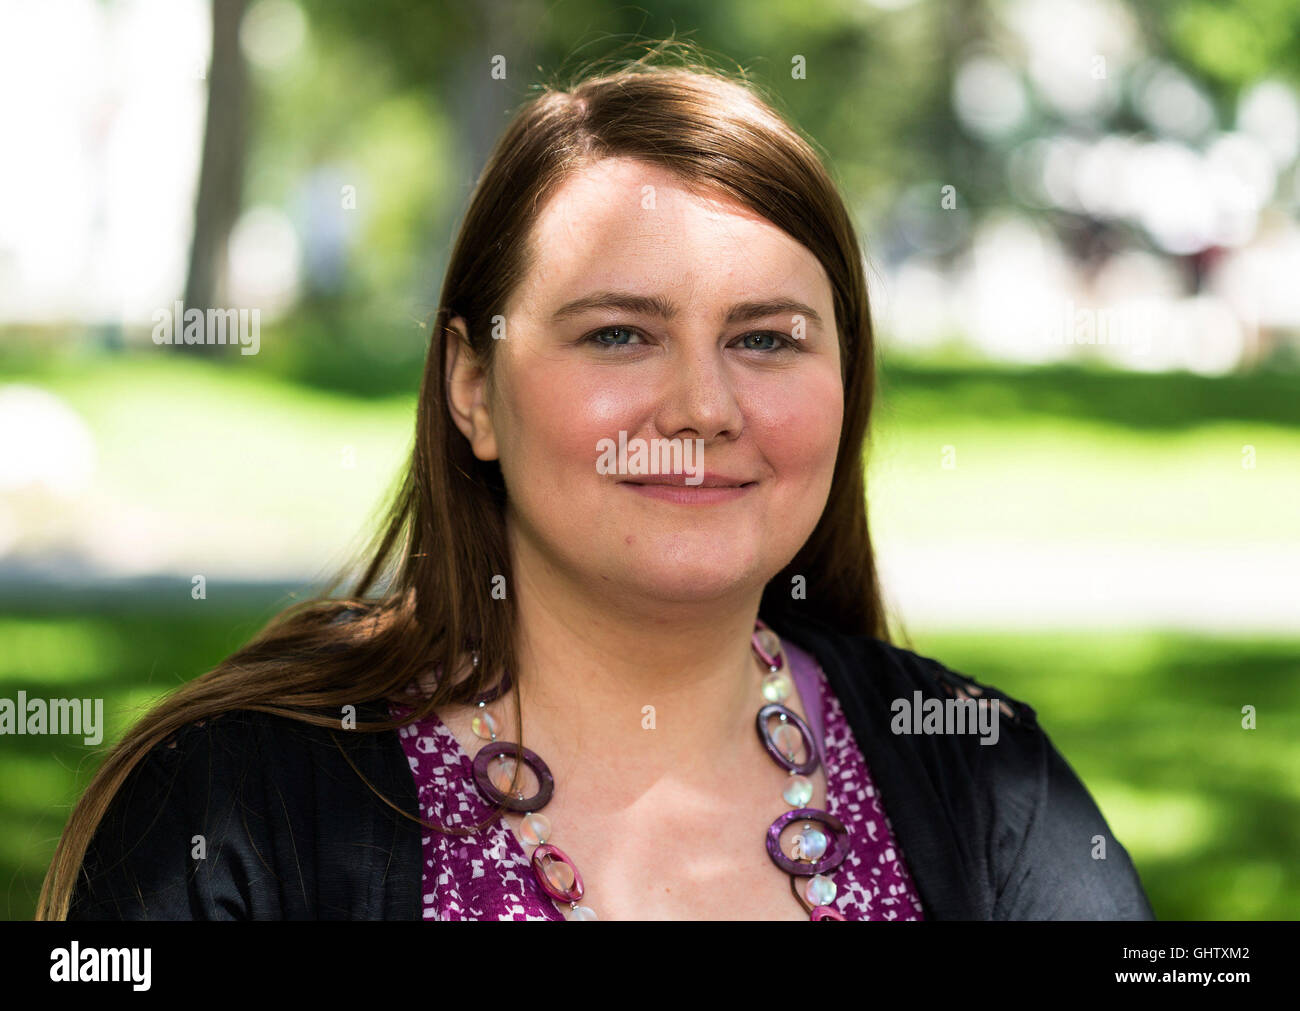 Vienna, Austria. 3rd Aug, 2016. Natascha Kampusch, who was held captive and abused for years, pictured during a dpa interview in the Burggarten park in Vienna, Austria, 3 August 2016. The 28-year-old is set to publish her new book Natascha Kampusch: 10 Jahre Freiheit' (lit. Natascha Kampusch: 10 years of freedom). PHOTO: PETER TRYKAR/DPA/Alamy Live News Stock Photo